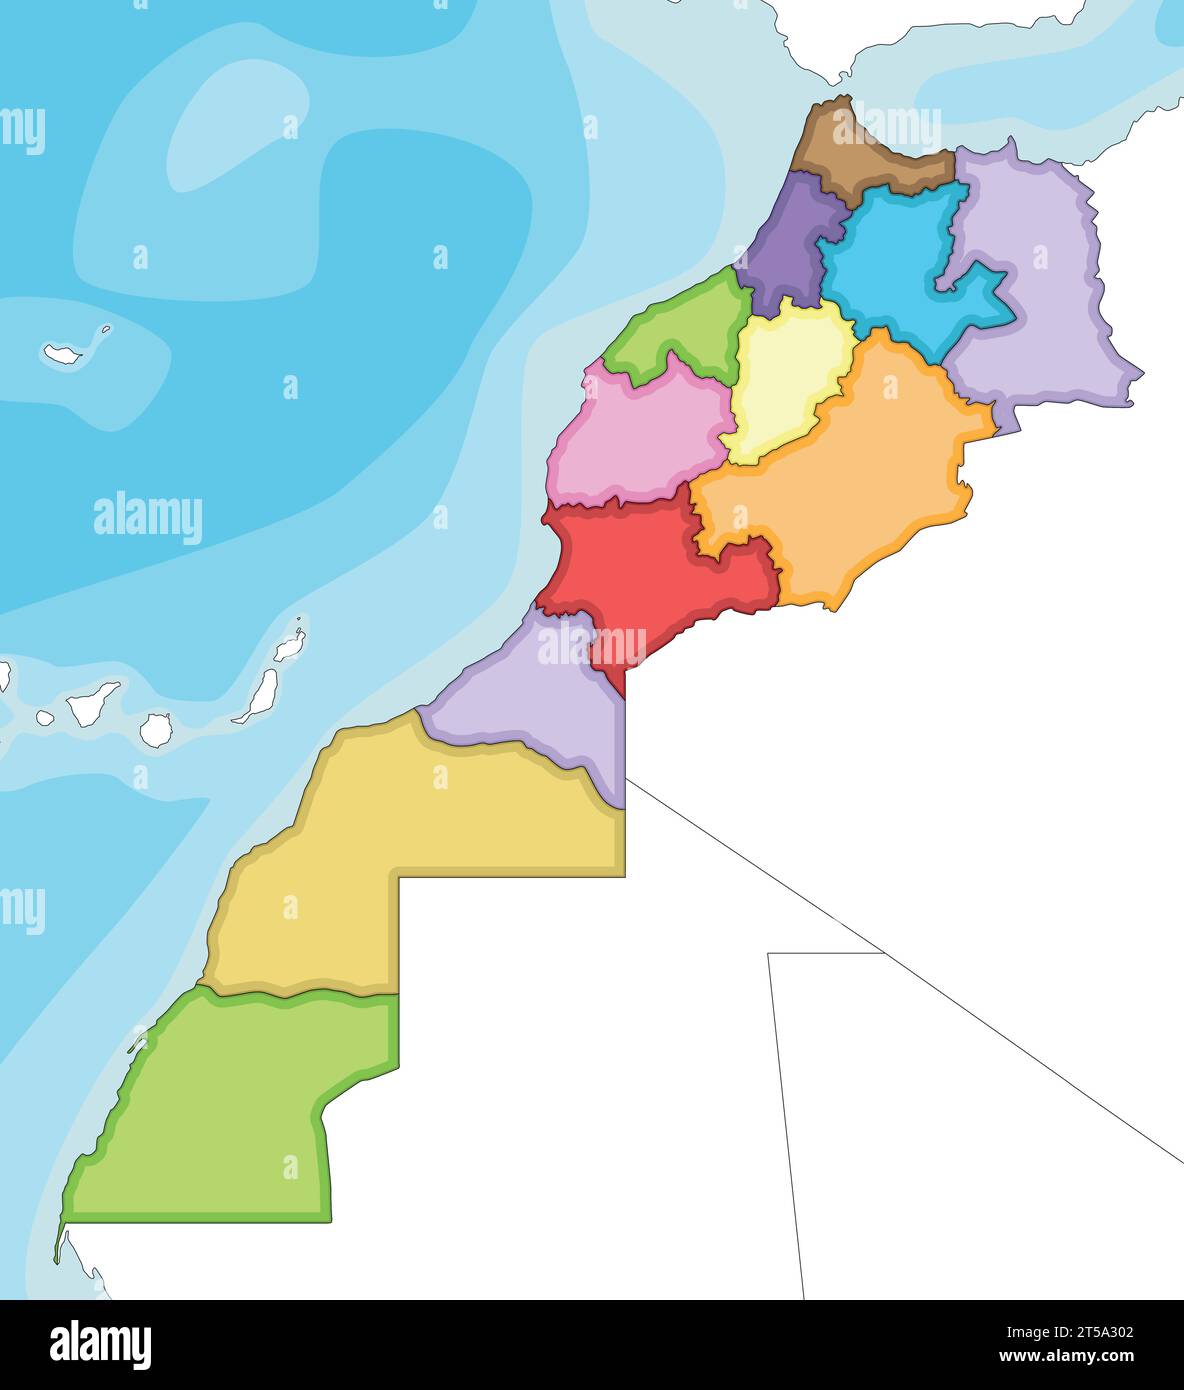 Vector illustrated blank map of Morocco with regions and administrative divisions, and neighbouring countries. Editable and clearly labeled layers. Stock Vector